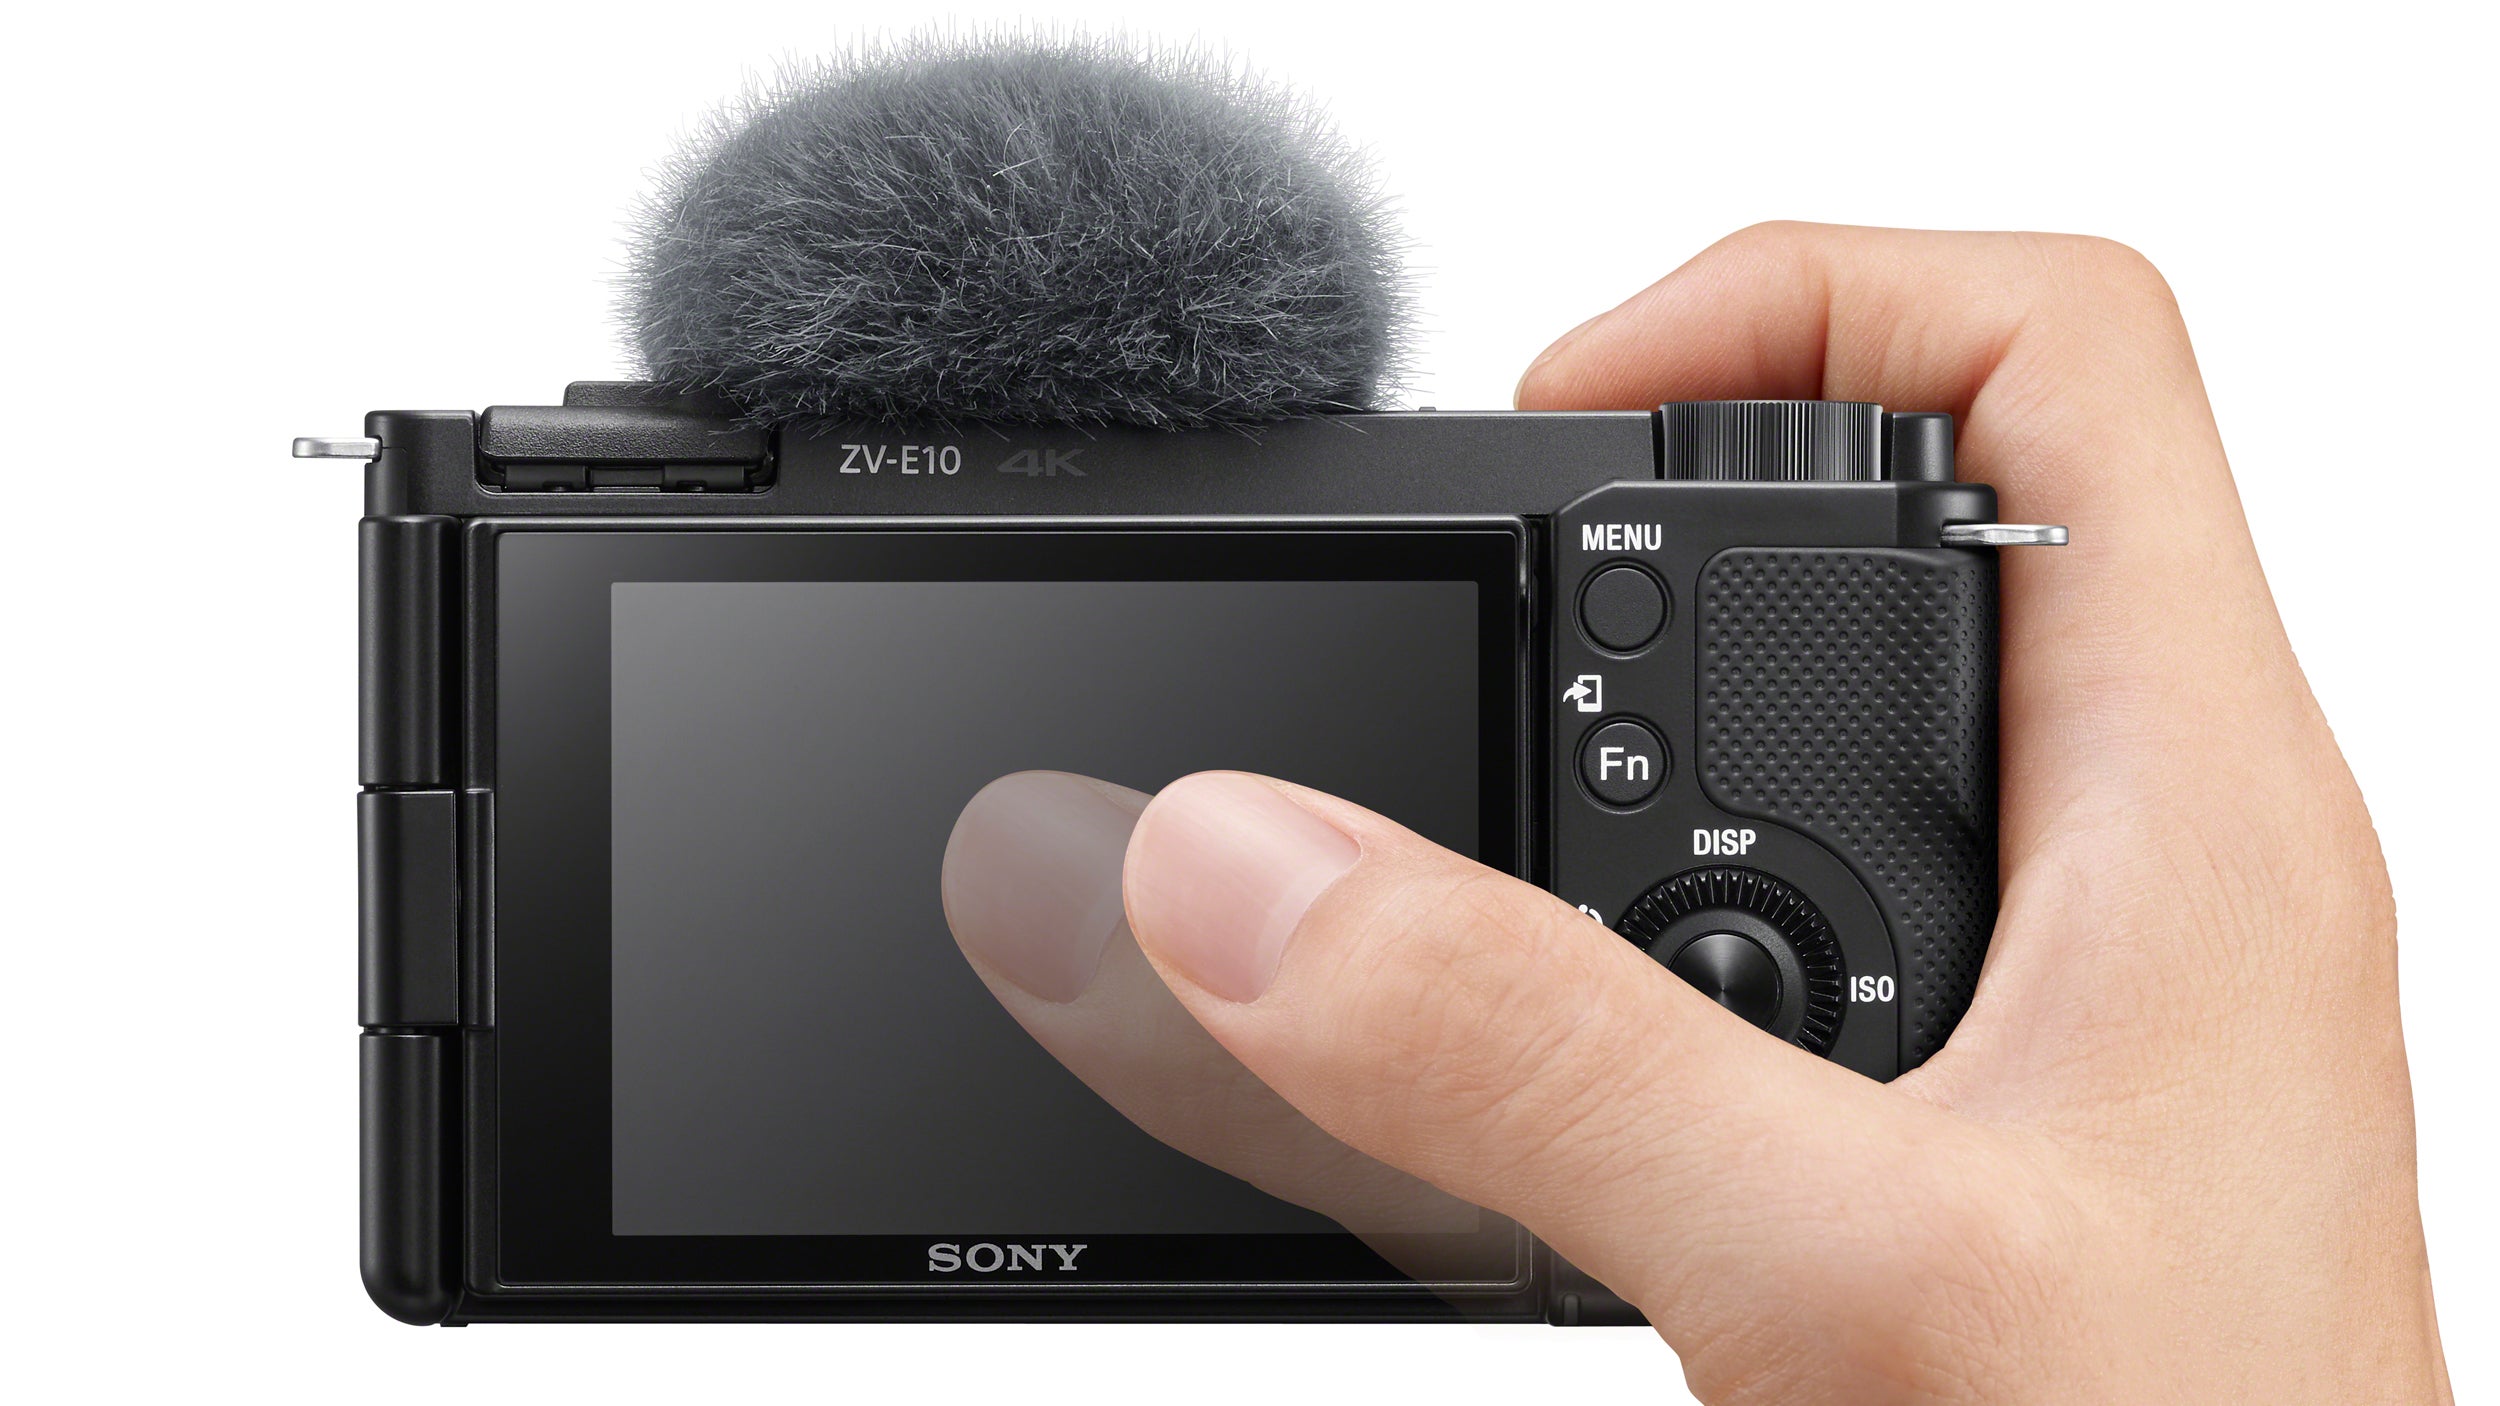 The ZV-E10's swivelling touchscreen display makes it easy to select subjects for autofocus tracking, while a lack of viewfinder makes room for a high-quality built-in directional mic that includes a windscreen. (Image: Sony)